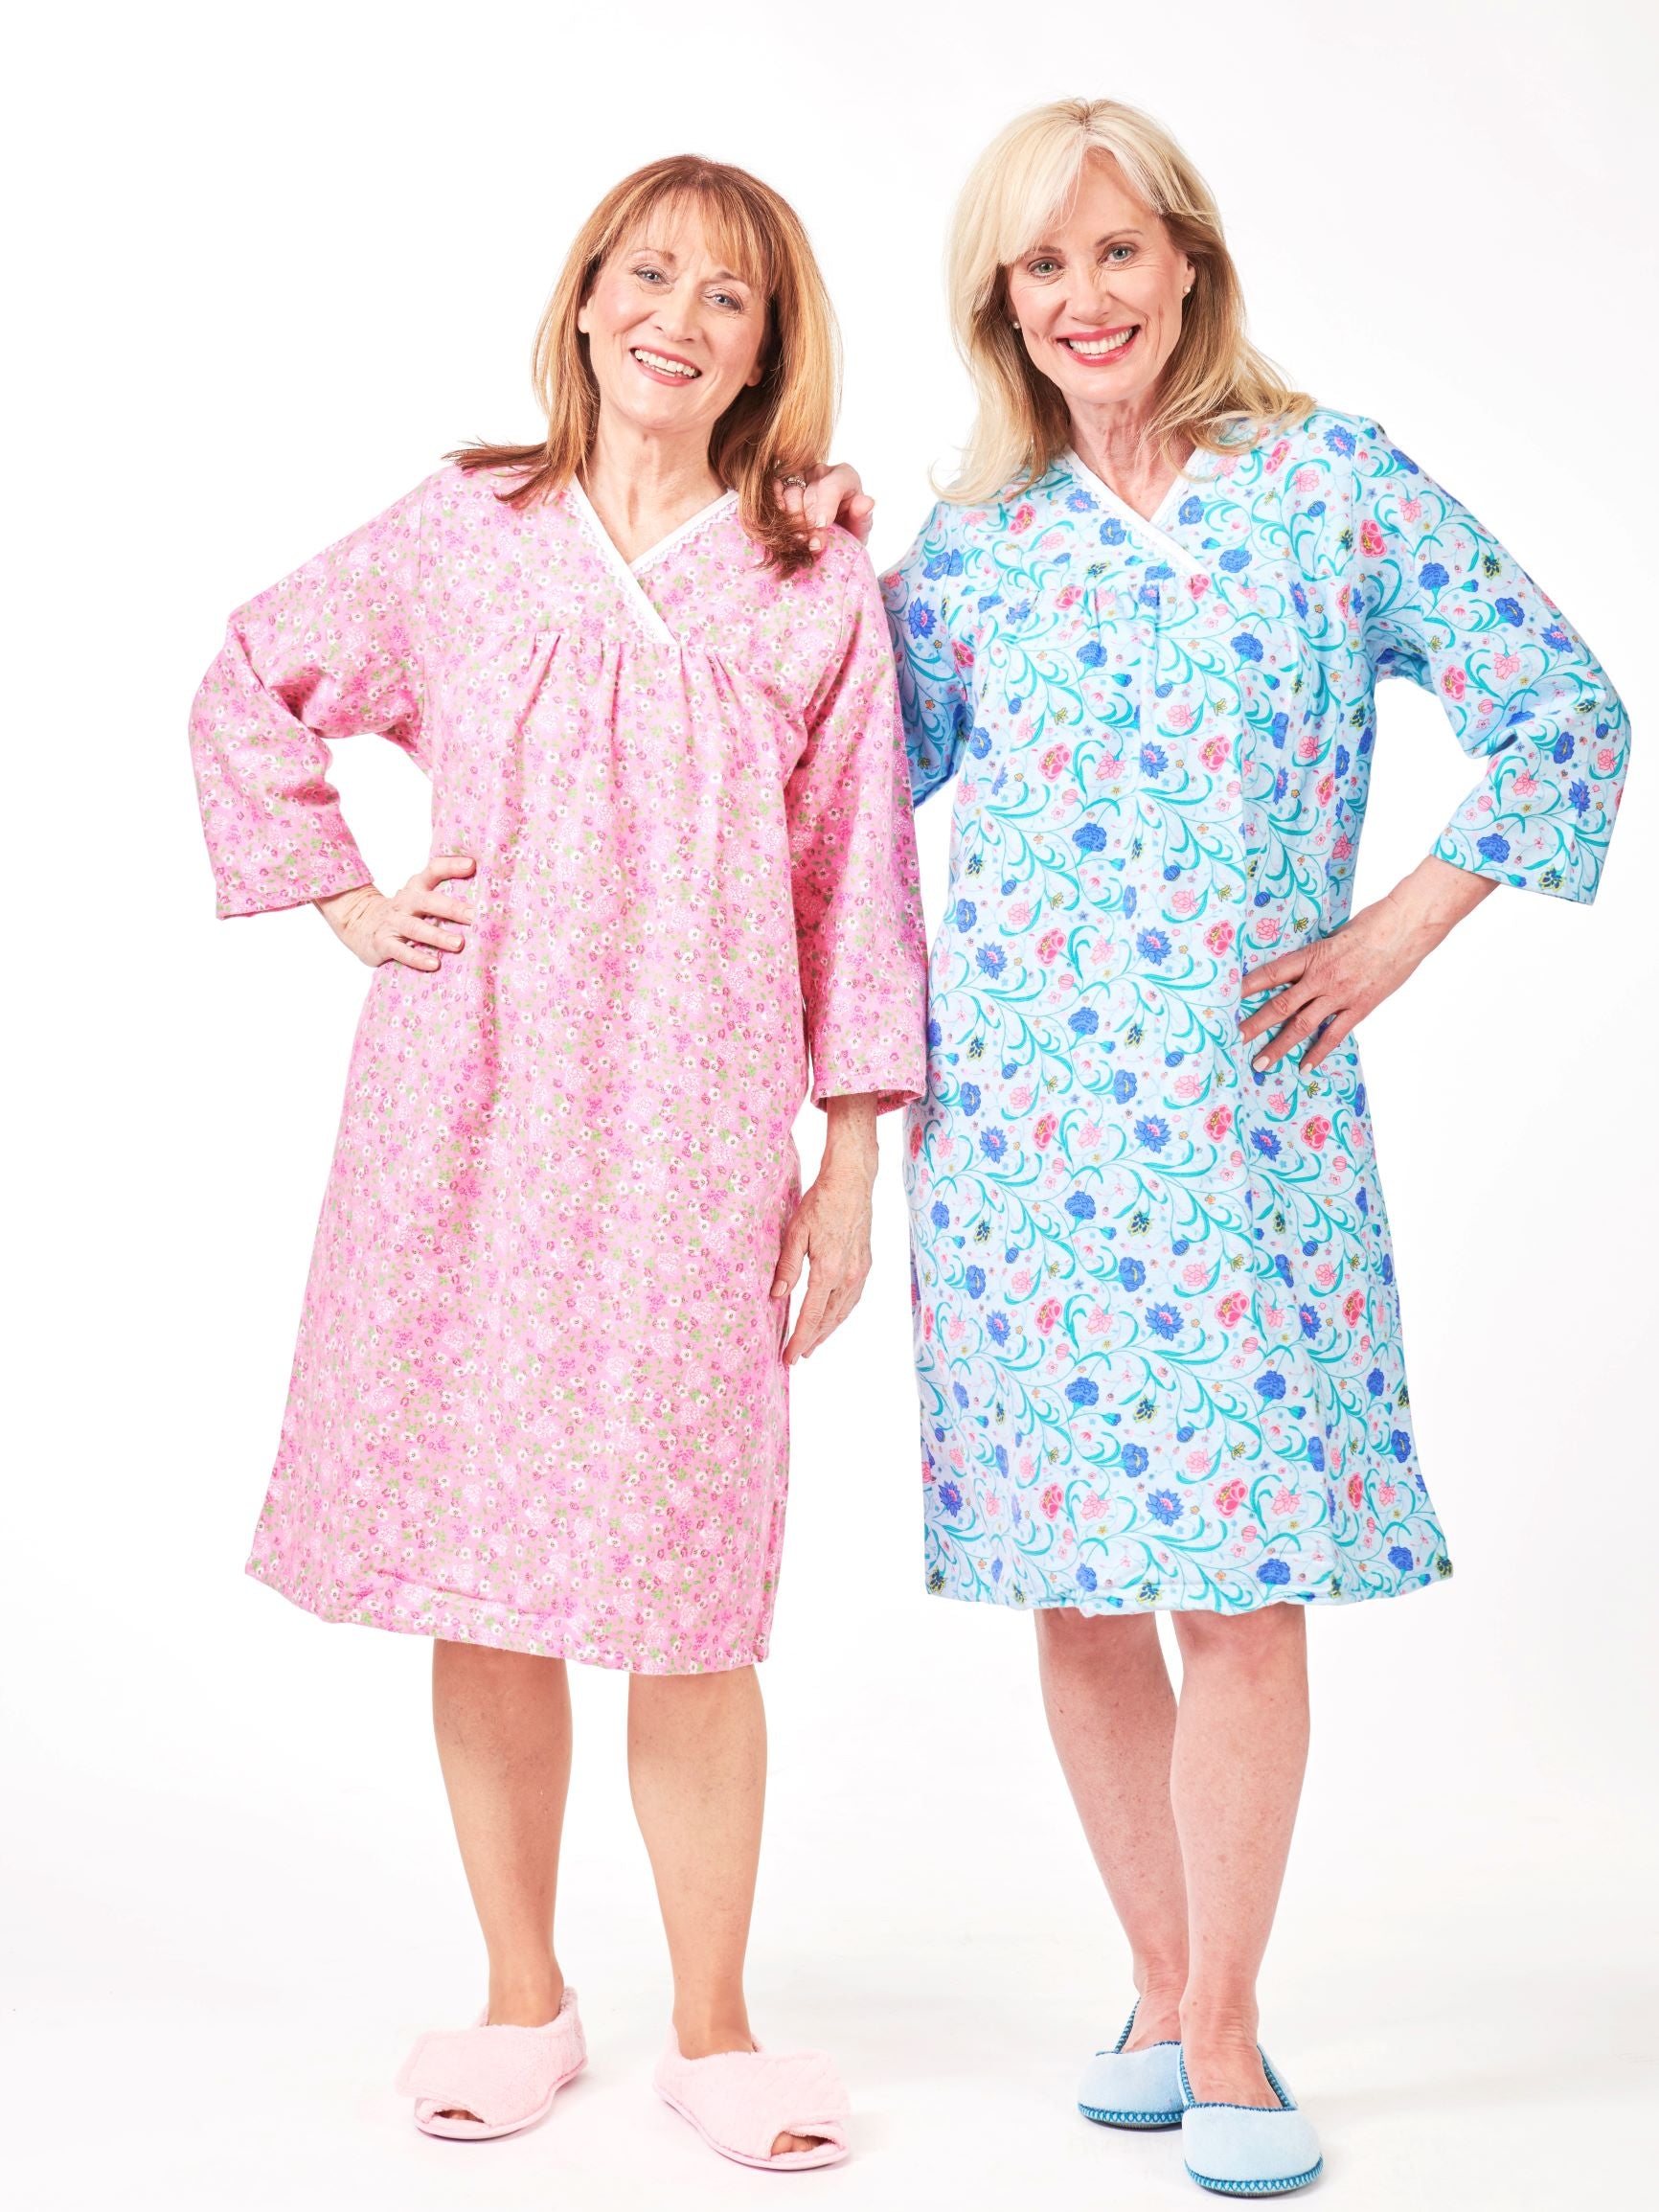 Adaptive Flannel Nightgown